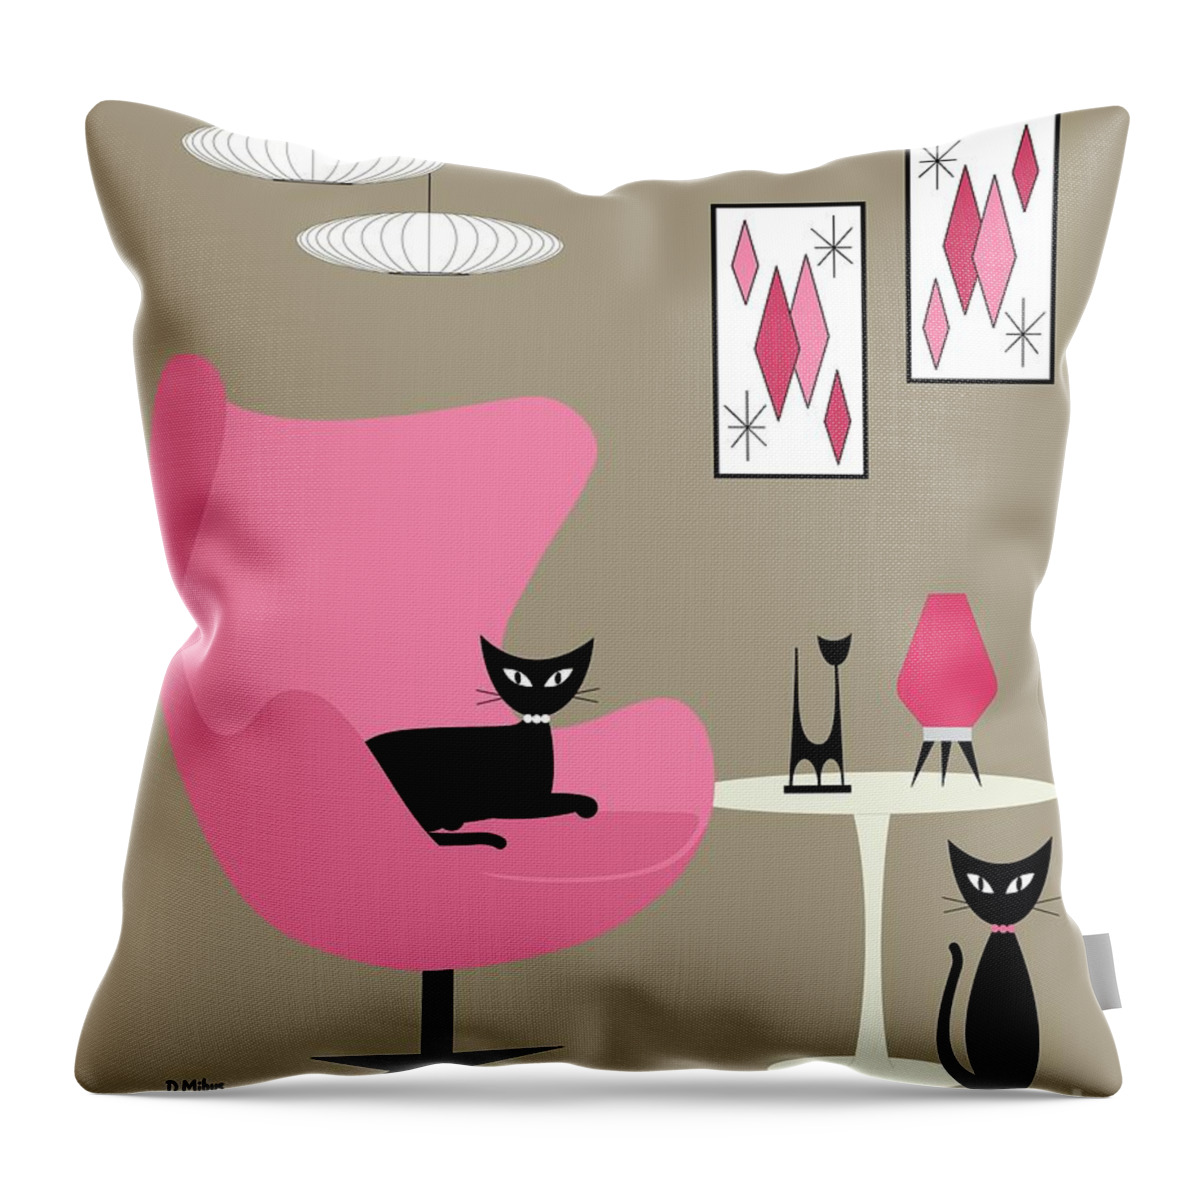 Mid Century Modern Throw Pillow featuring the digital art Pink Egg Chair with Cats by Donna Mibus